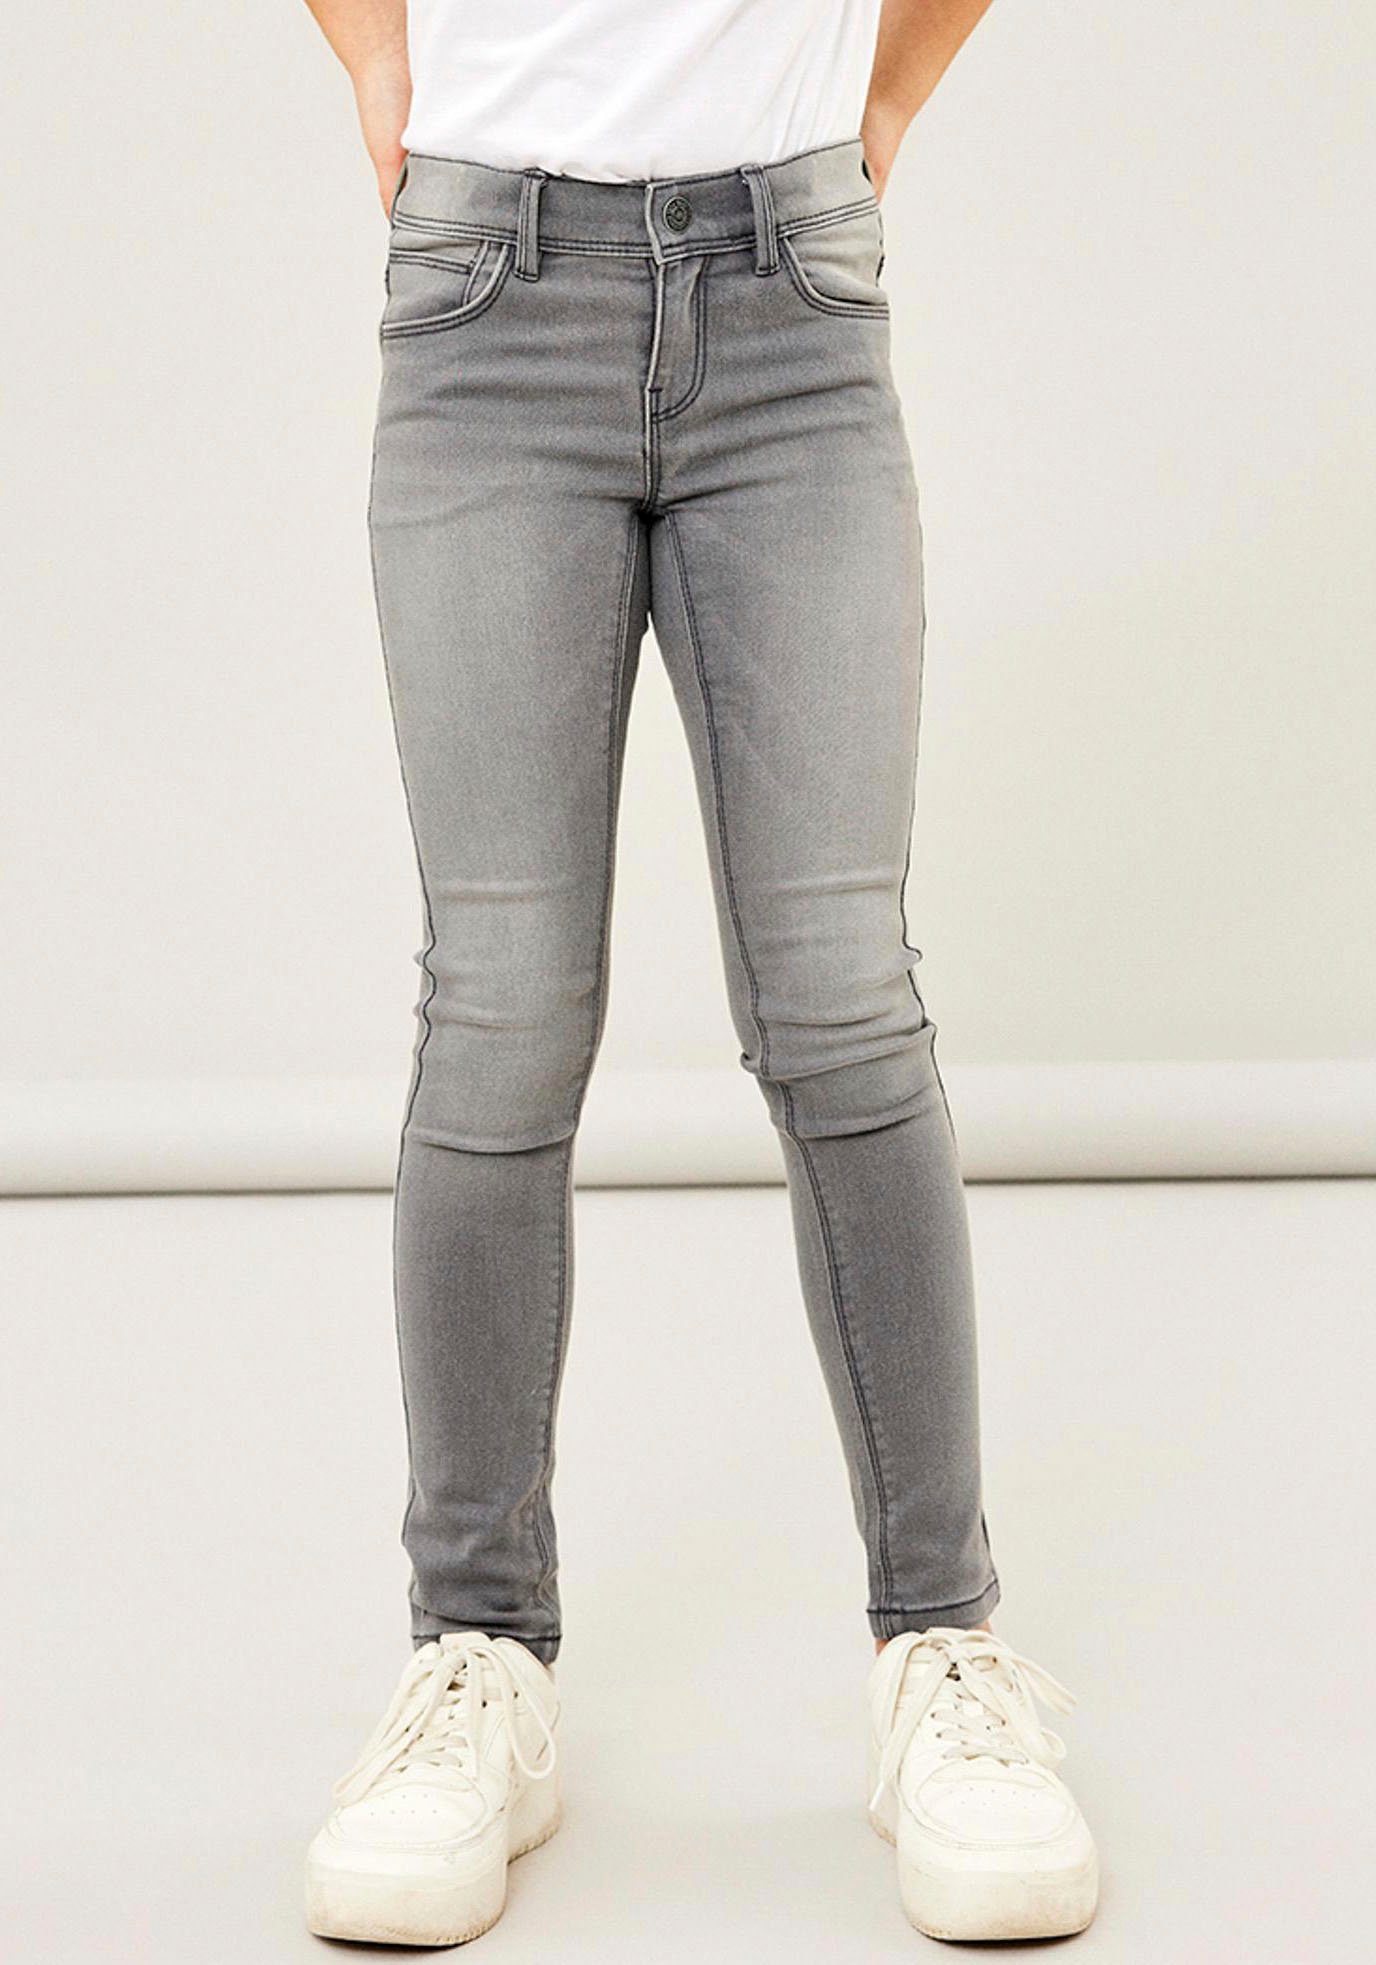 Stretch-Jeans Name denim NKFPOLLY DNMTAX light It PANT grey